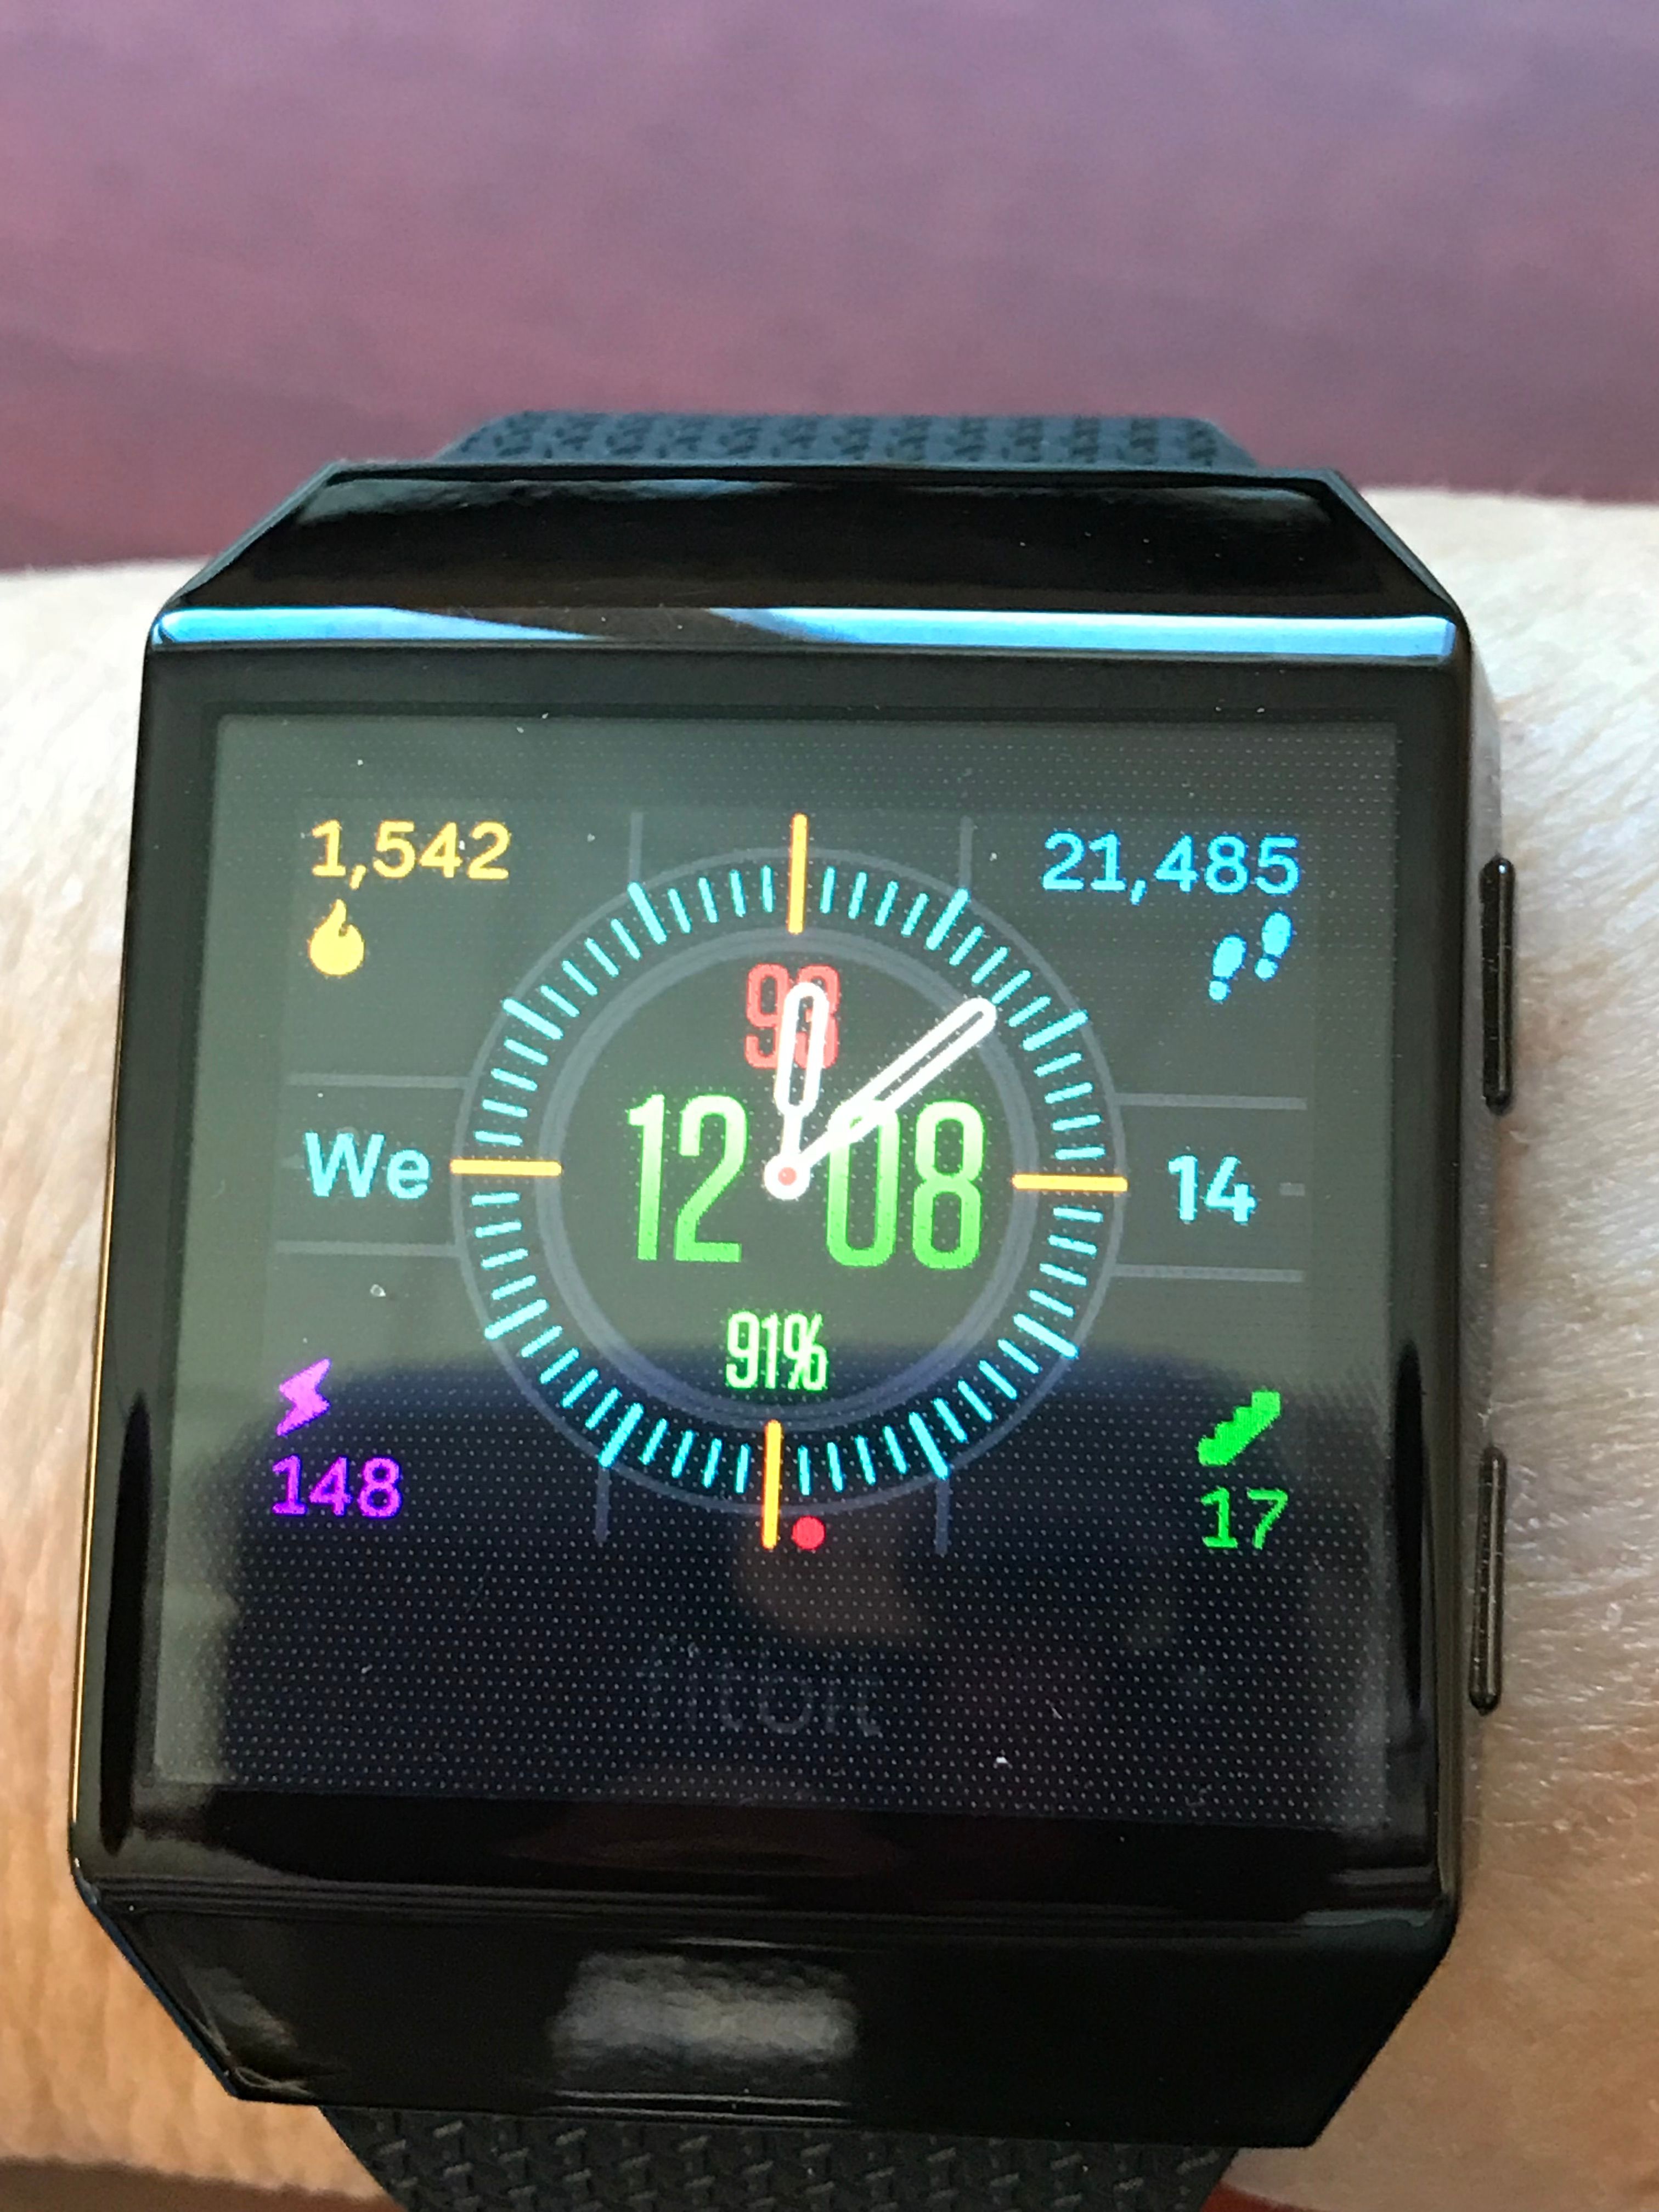 Solved: Screen protector - Fitbit Community